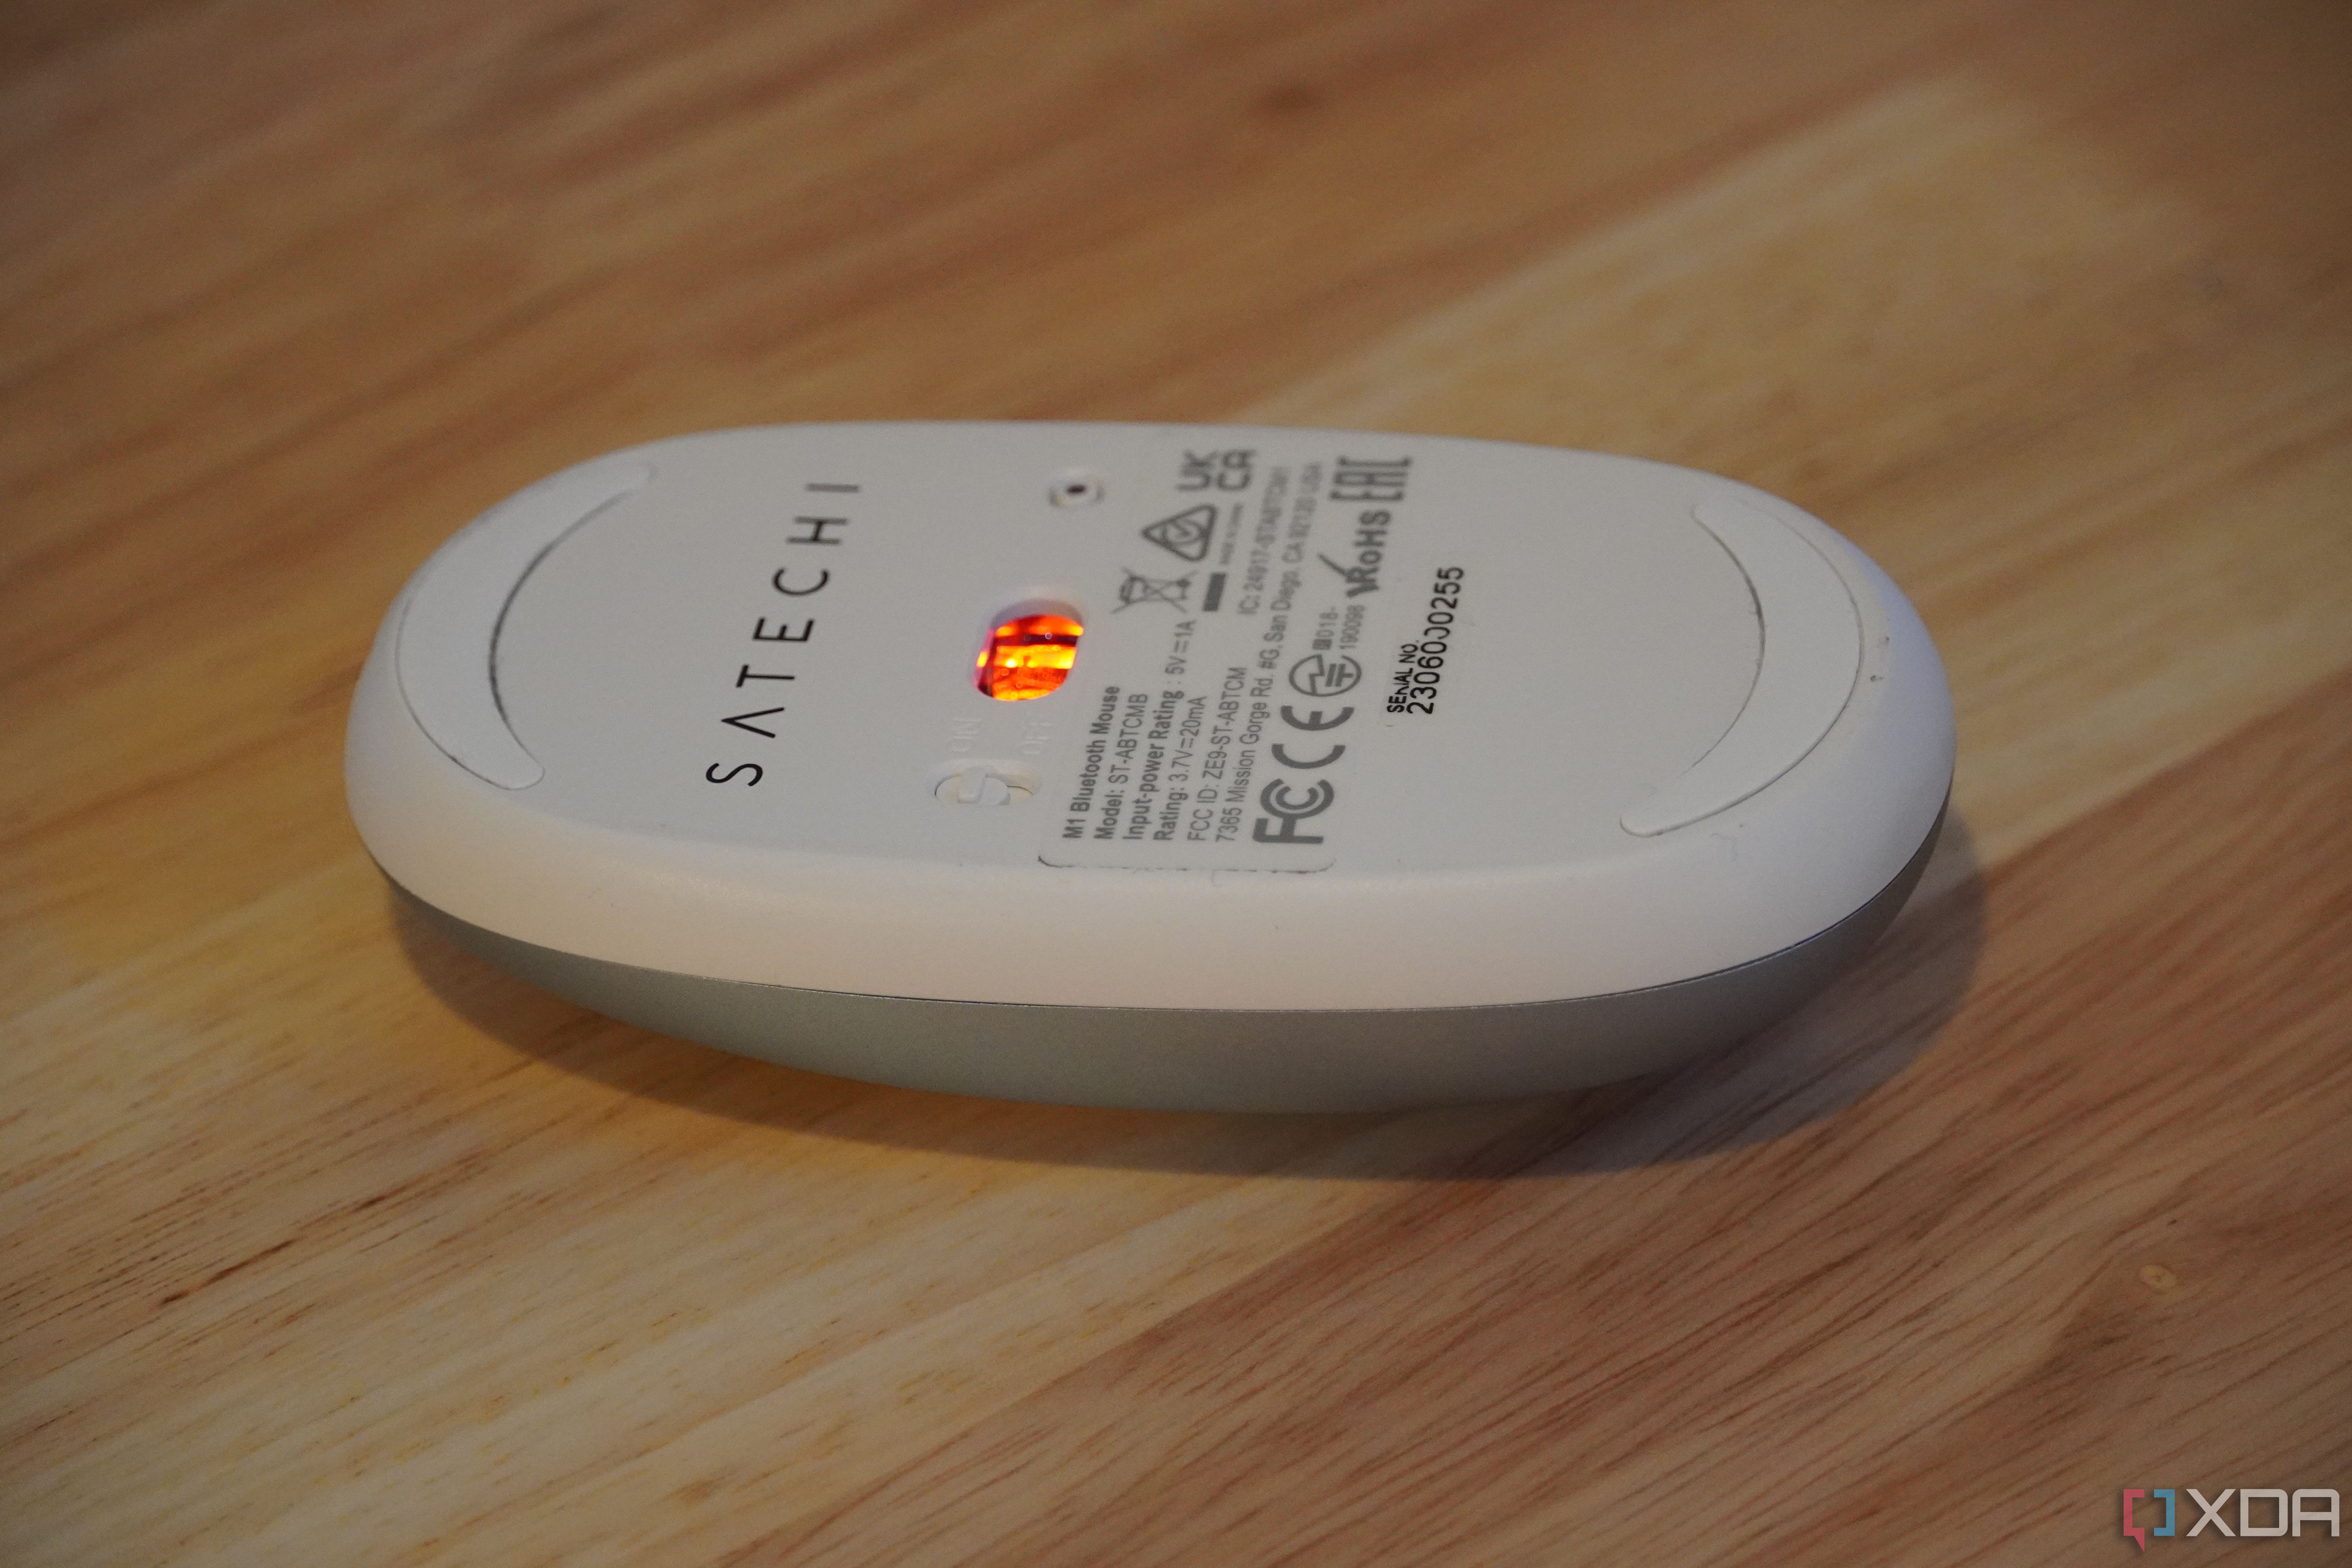 Satechi M1 Wireless Mouse Review: Portable Enough To Keep In A Pocket